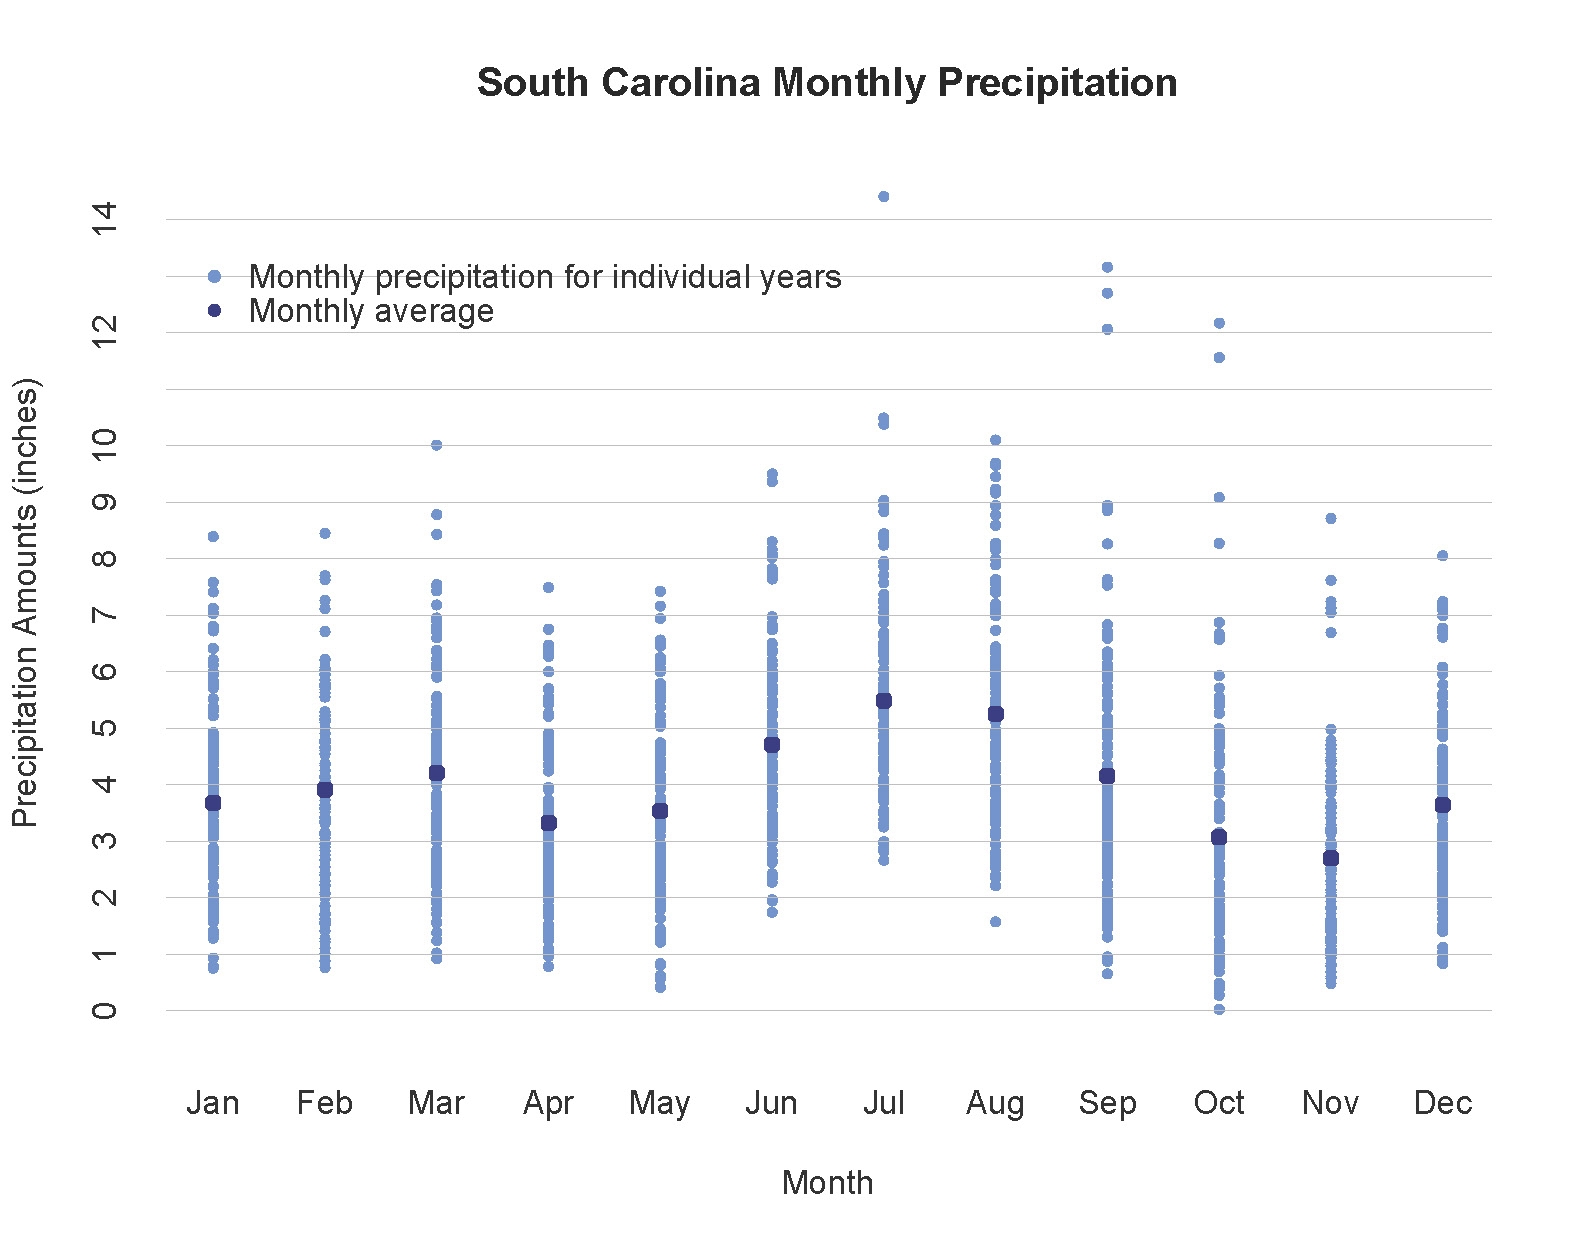 Chart of monthly precipitation showing seasonal changes from data ranging 1895 to 2016.